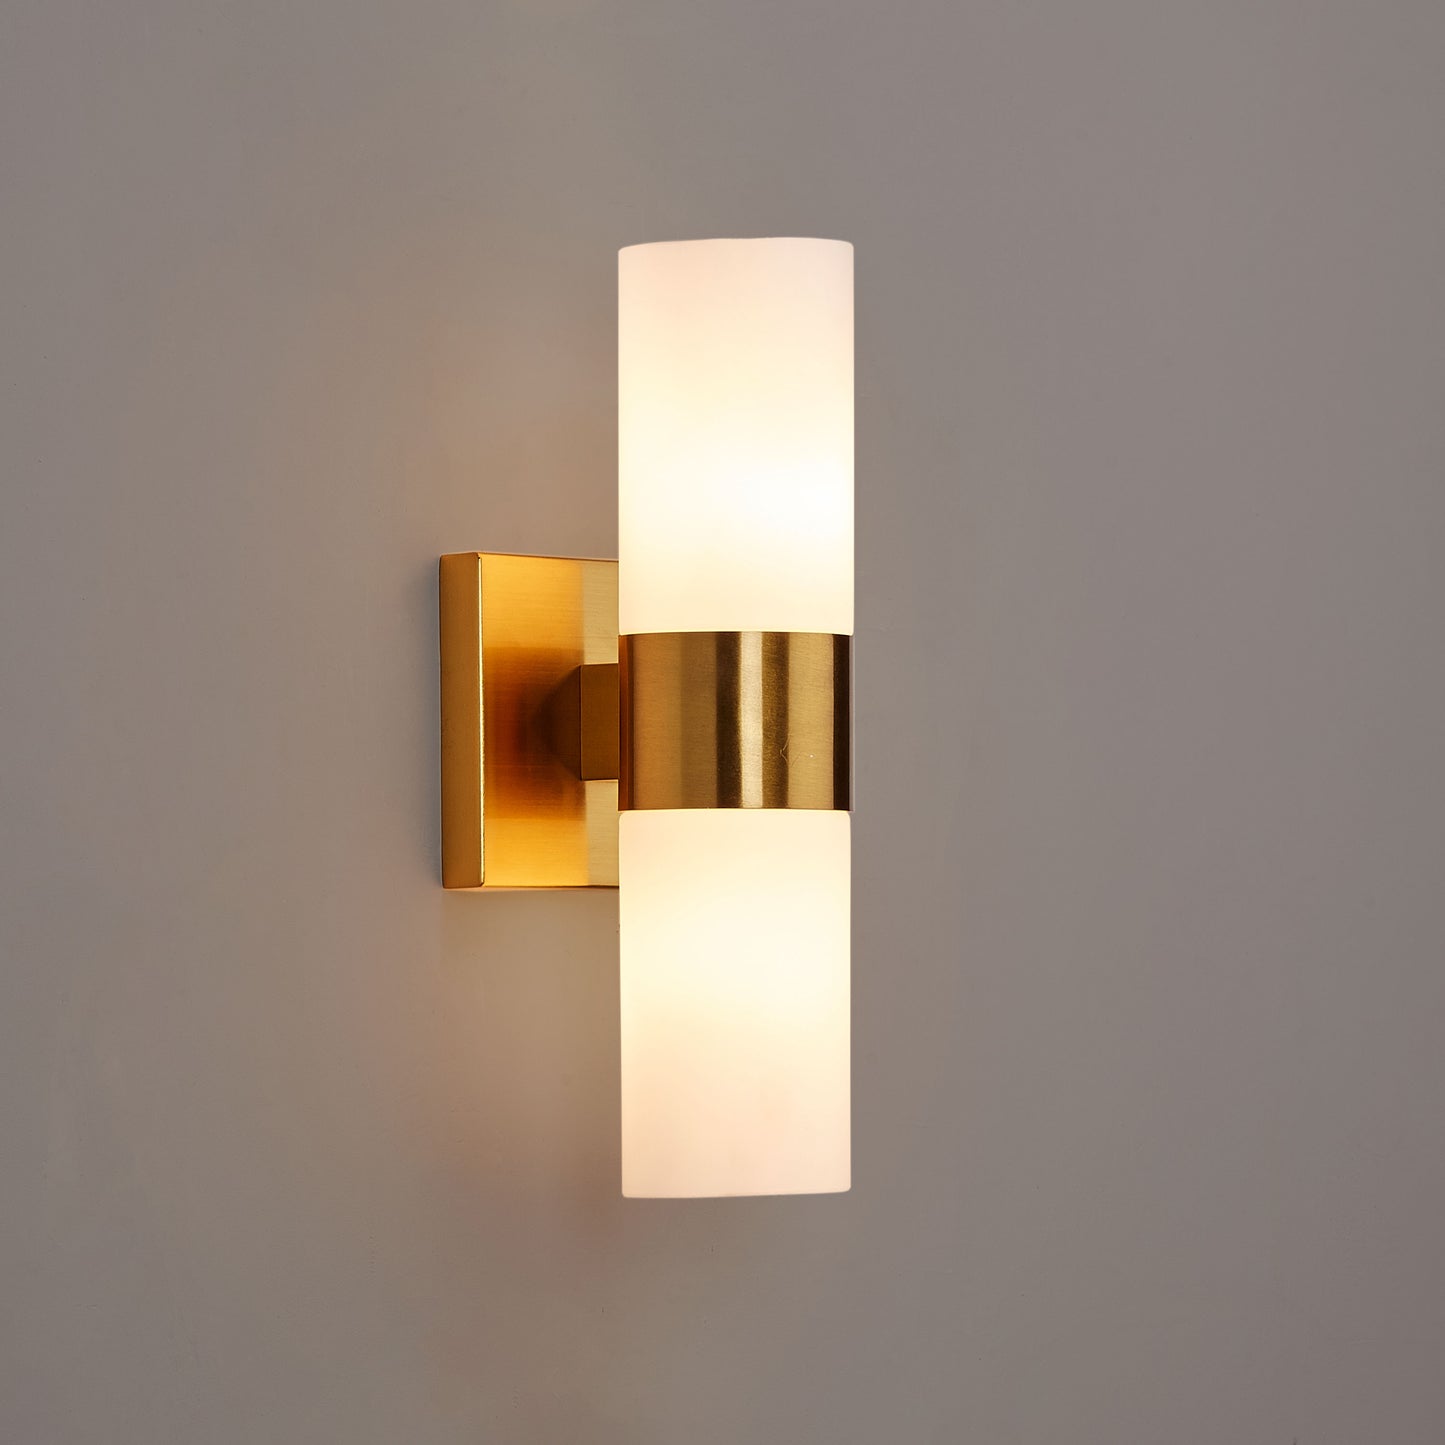 2-lights-wall-sconce-with-white-glass-shade